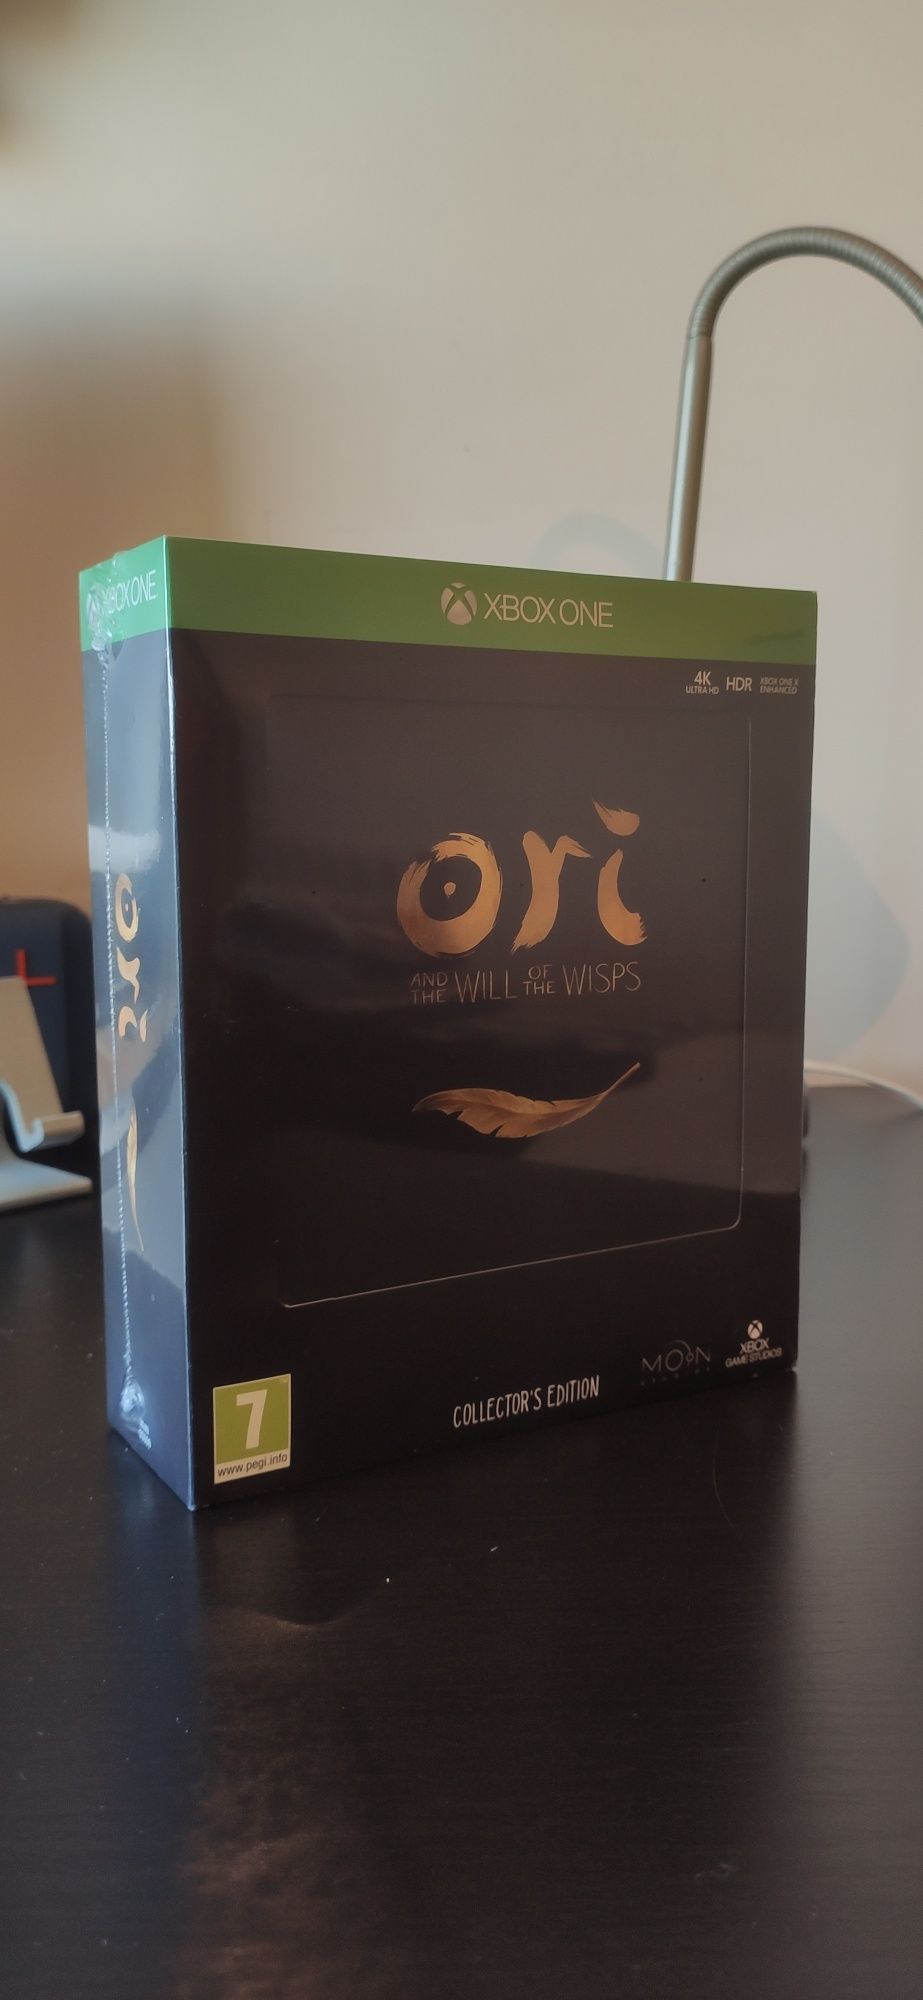 Ori and the will of the wisps Collector's edition - Xbox one 

Jo